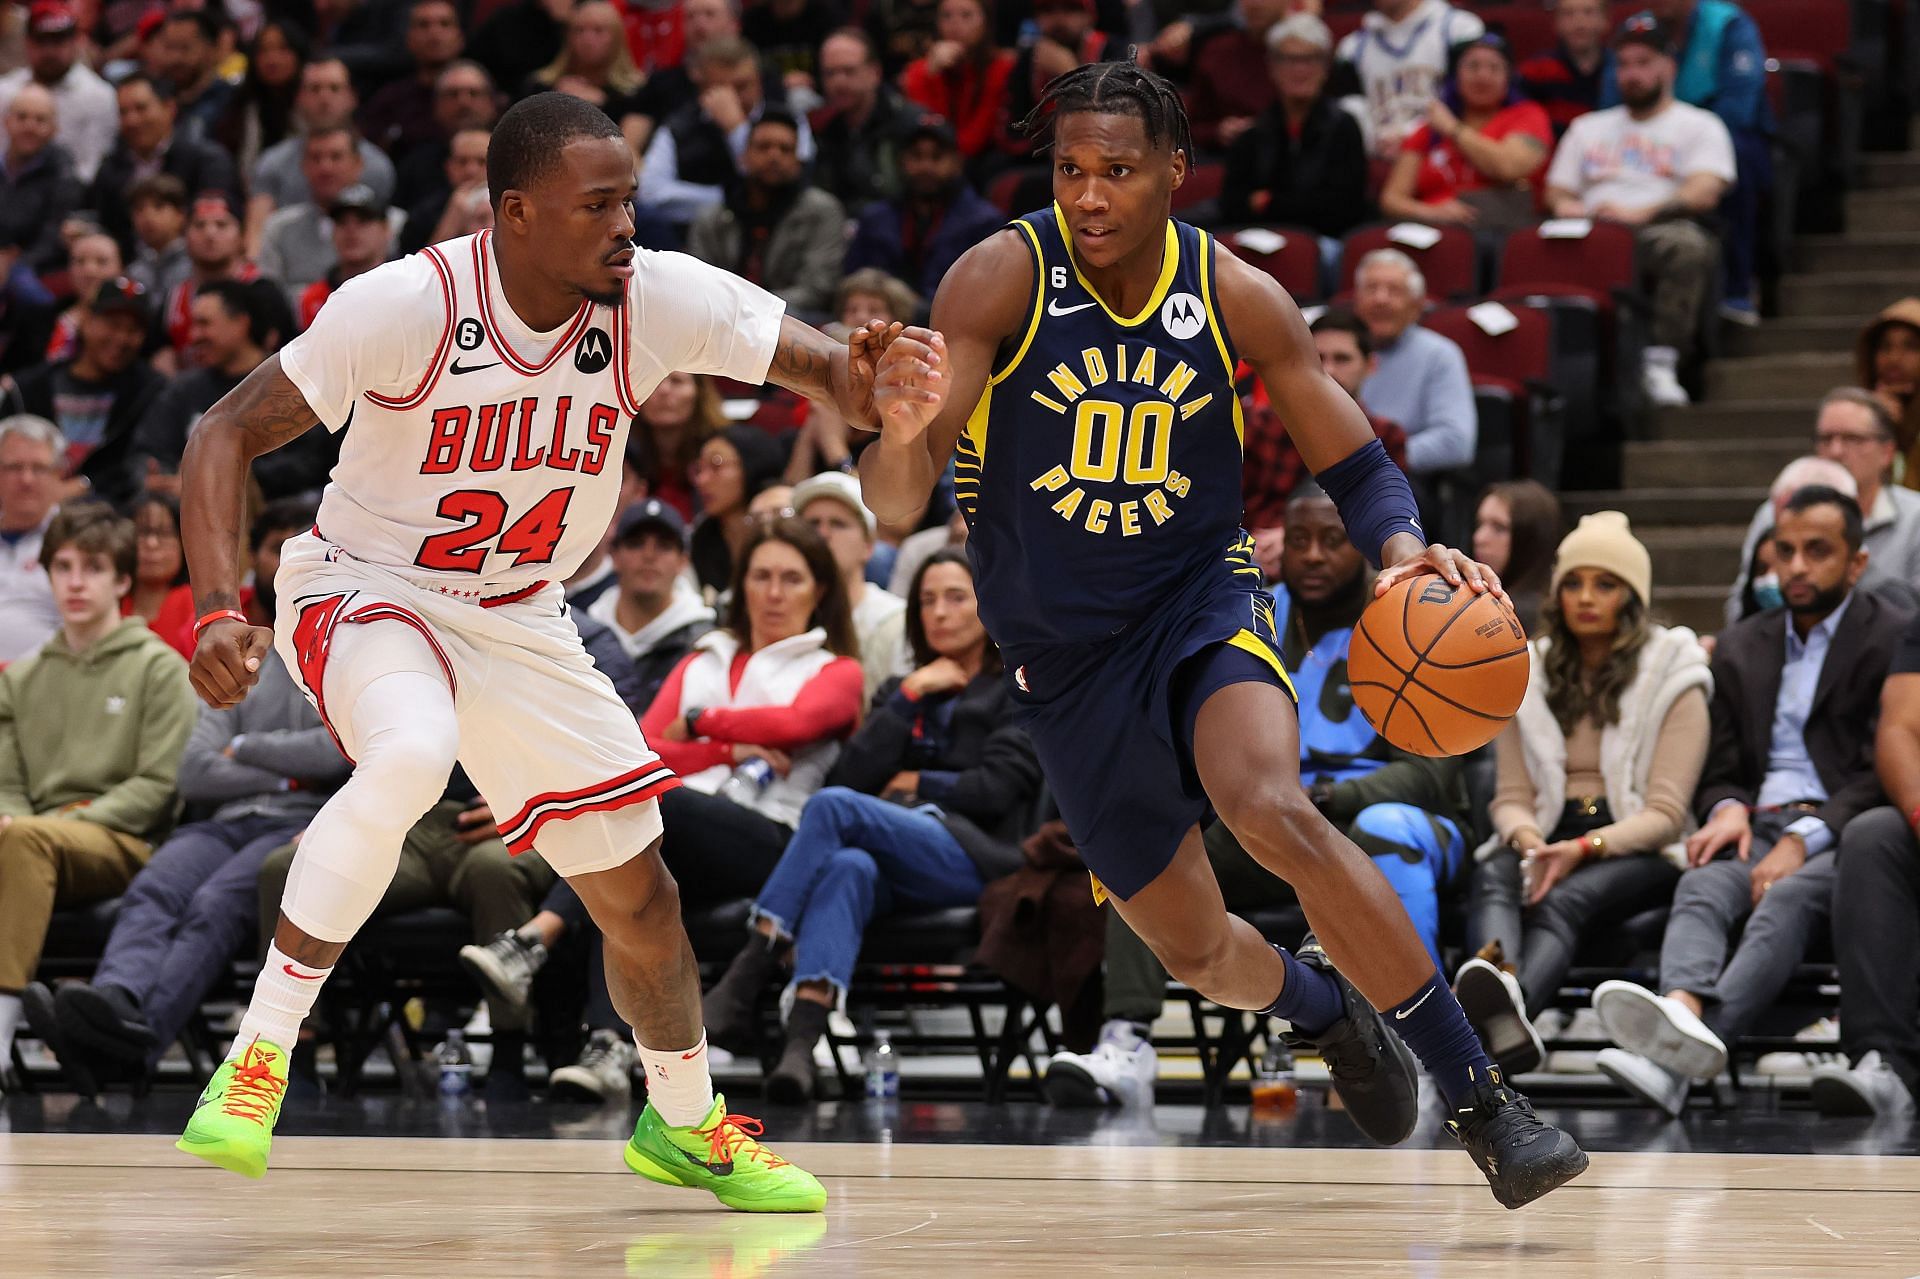 Pacers Rookie Bennedict Mathurin Signs Multi-Year Shoe Deal With Adidas